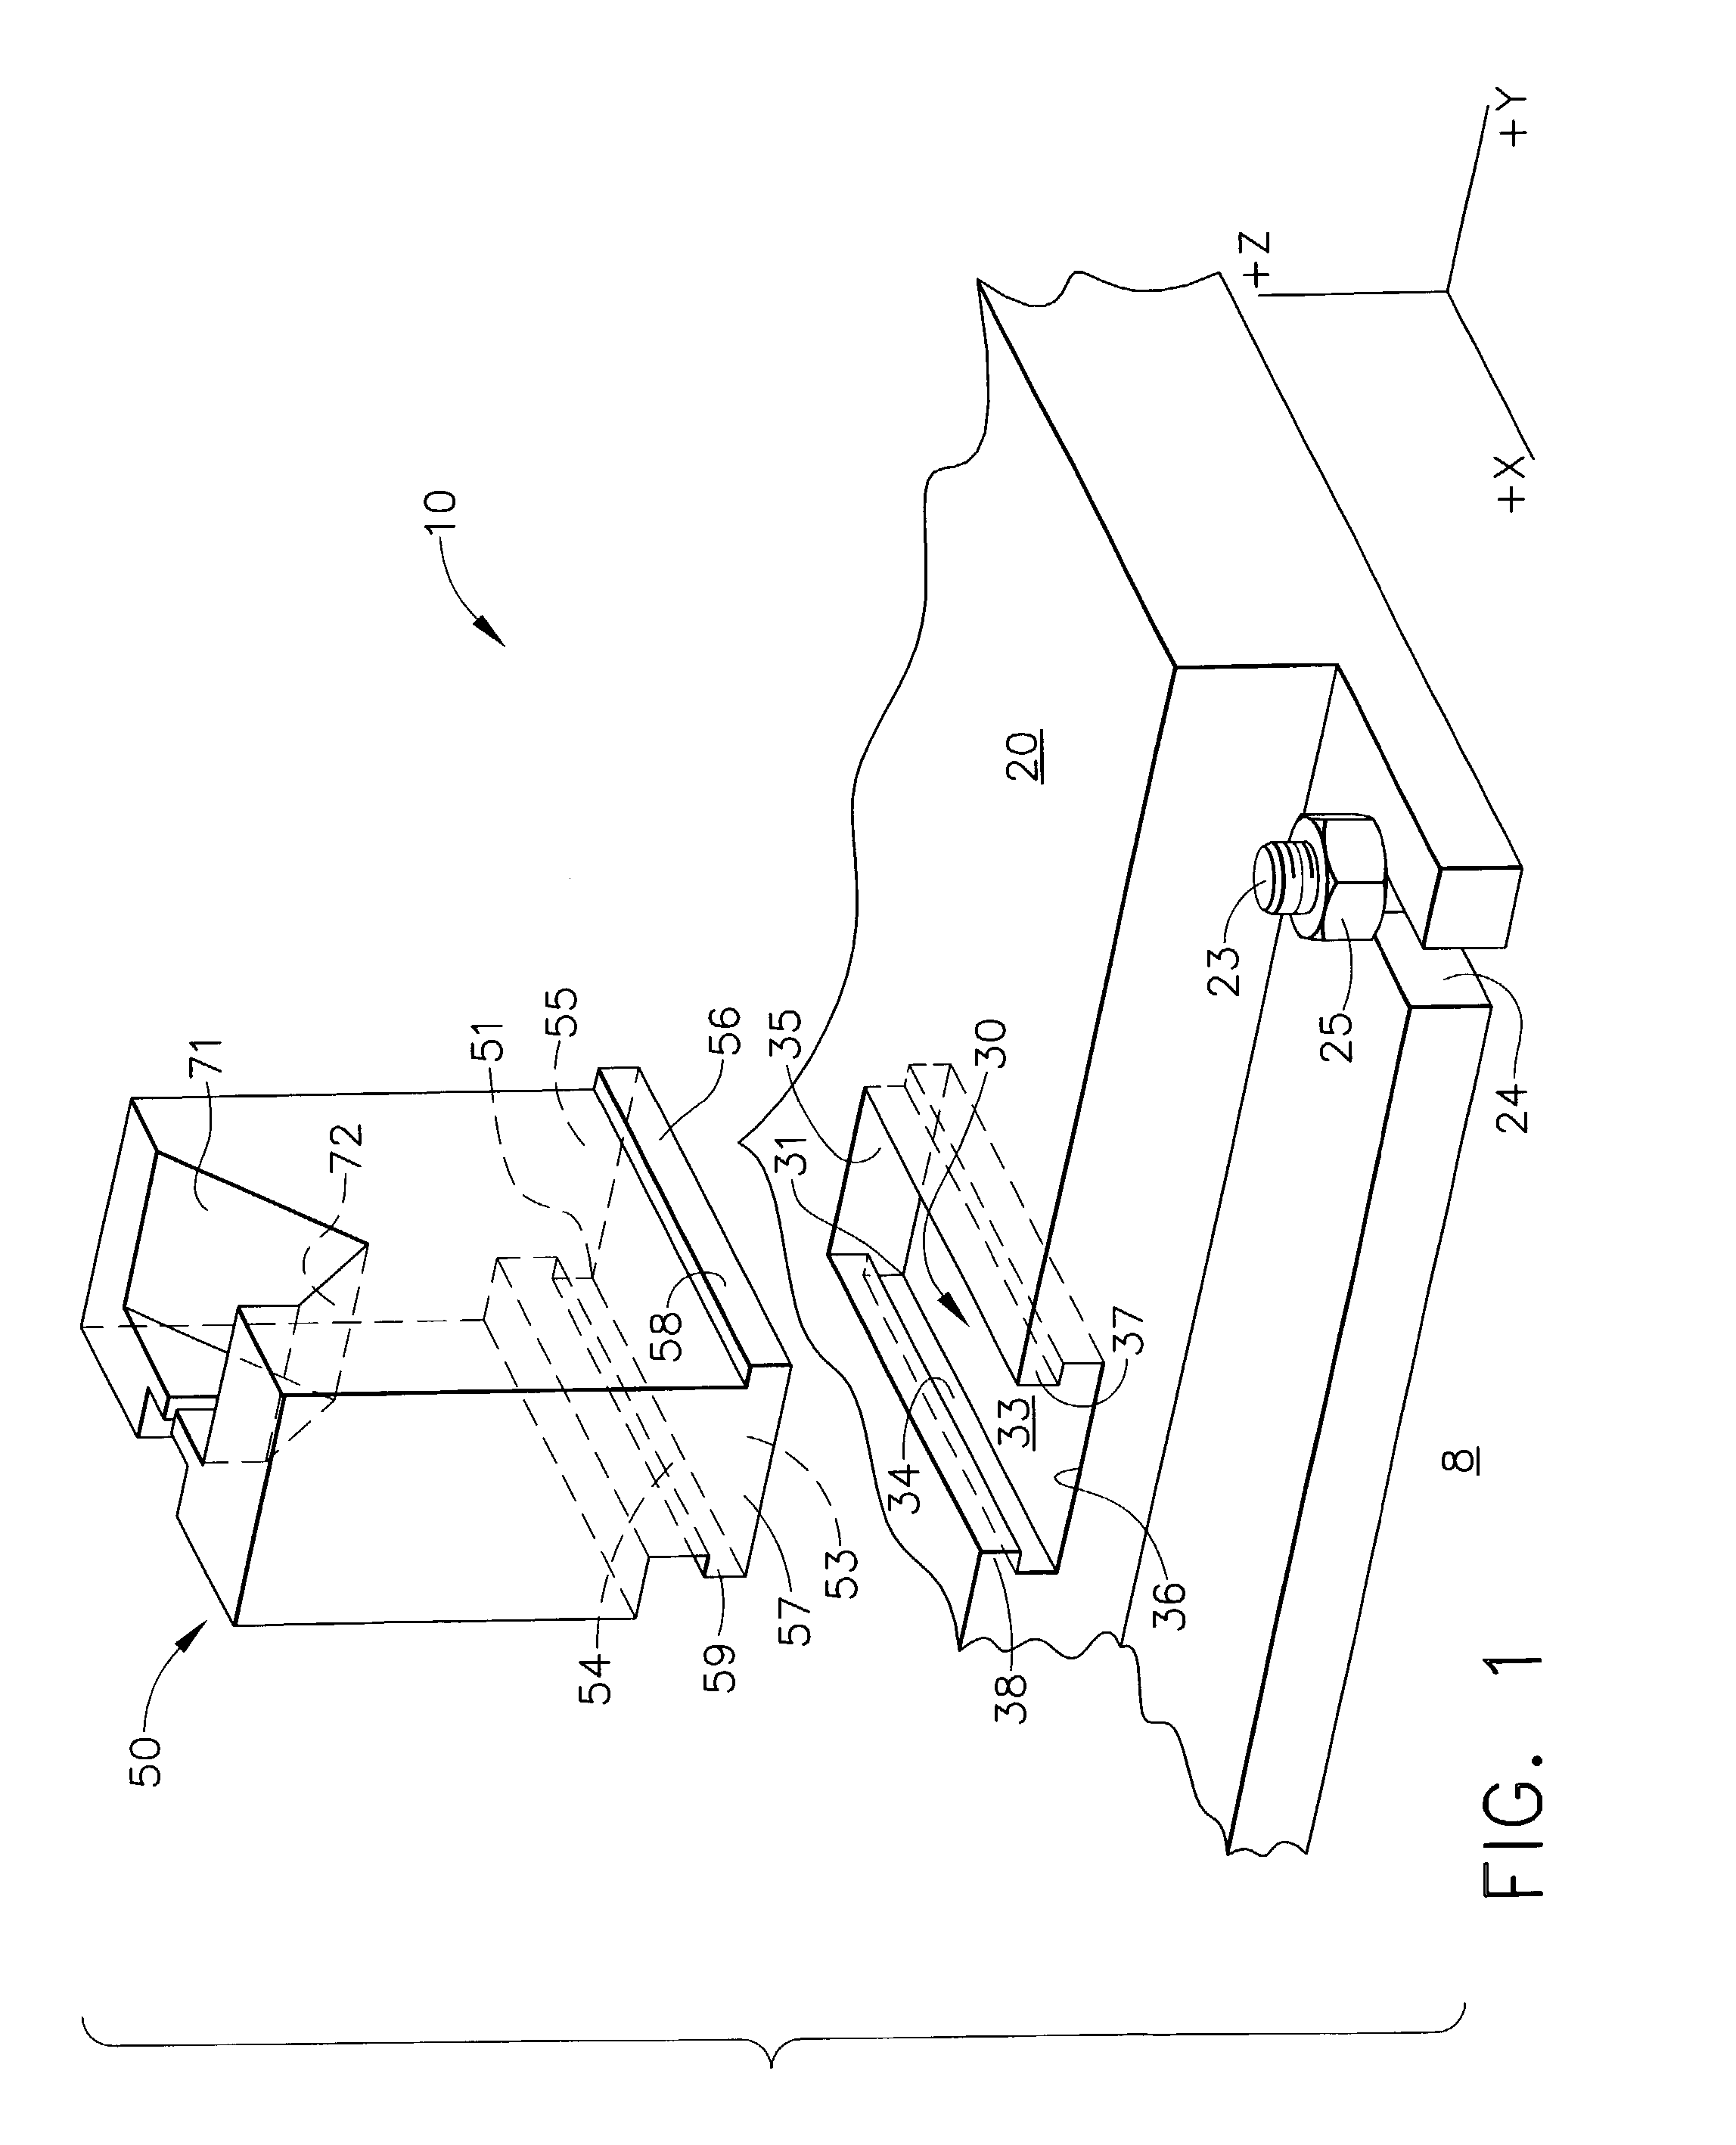 Manufacturing cell using tooling apparatus